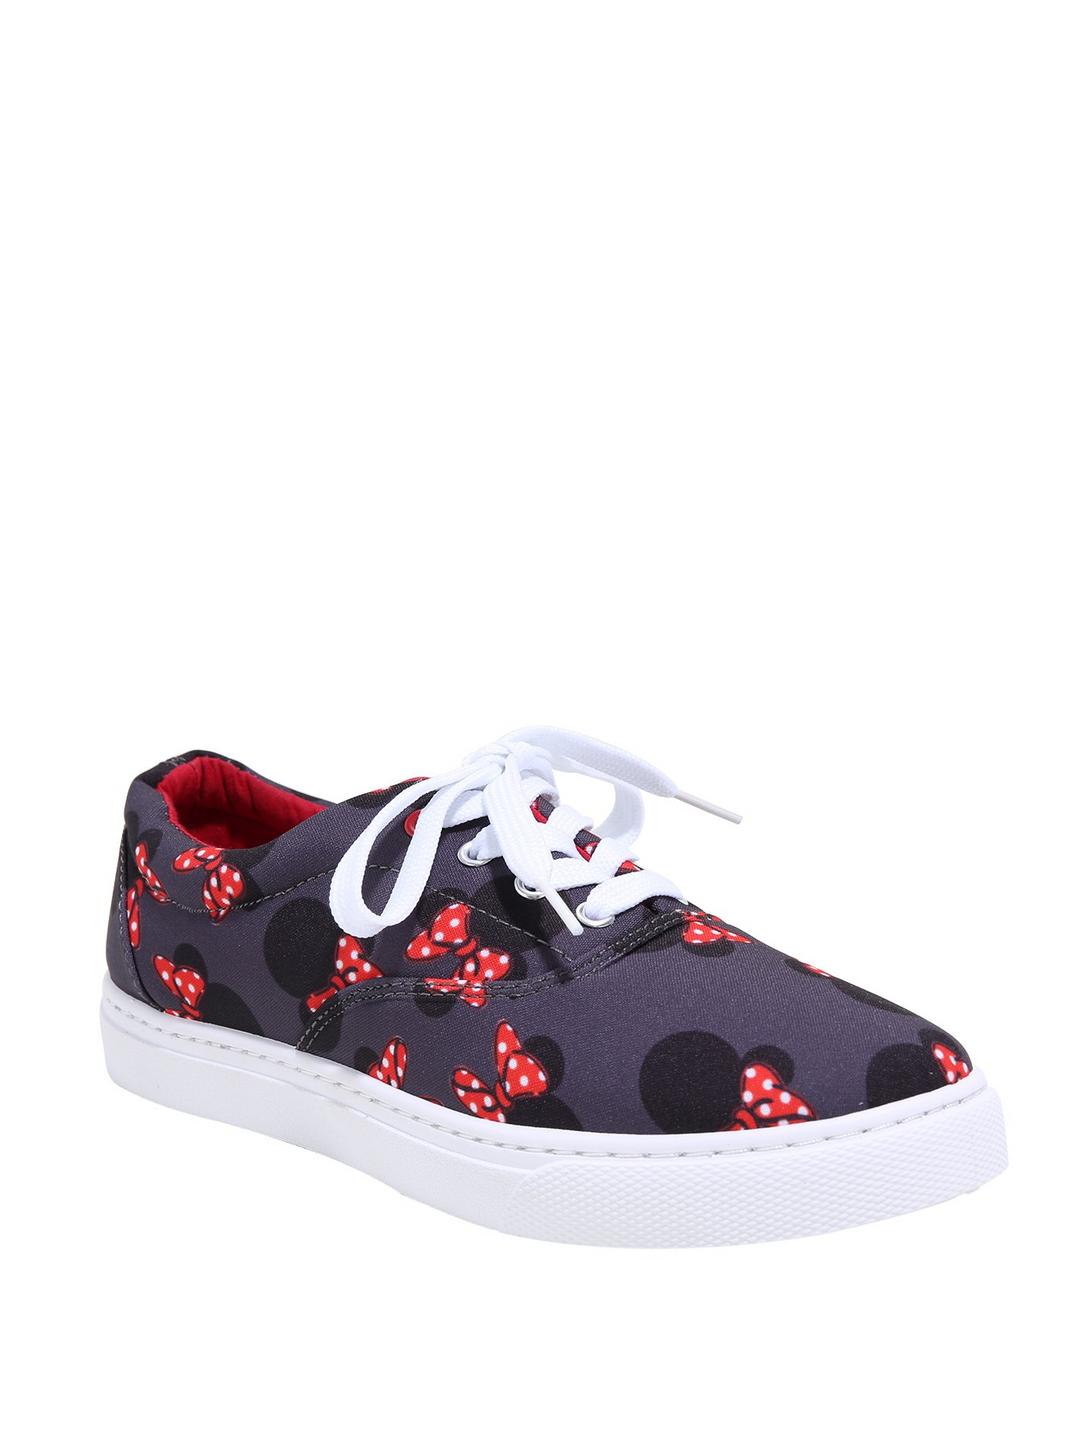 Disney Minnie Mouse Bow Print Sneakers, MULTI, hi-res